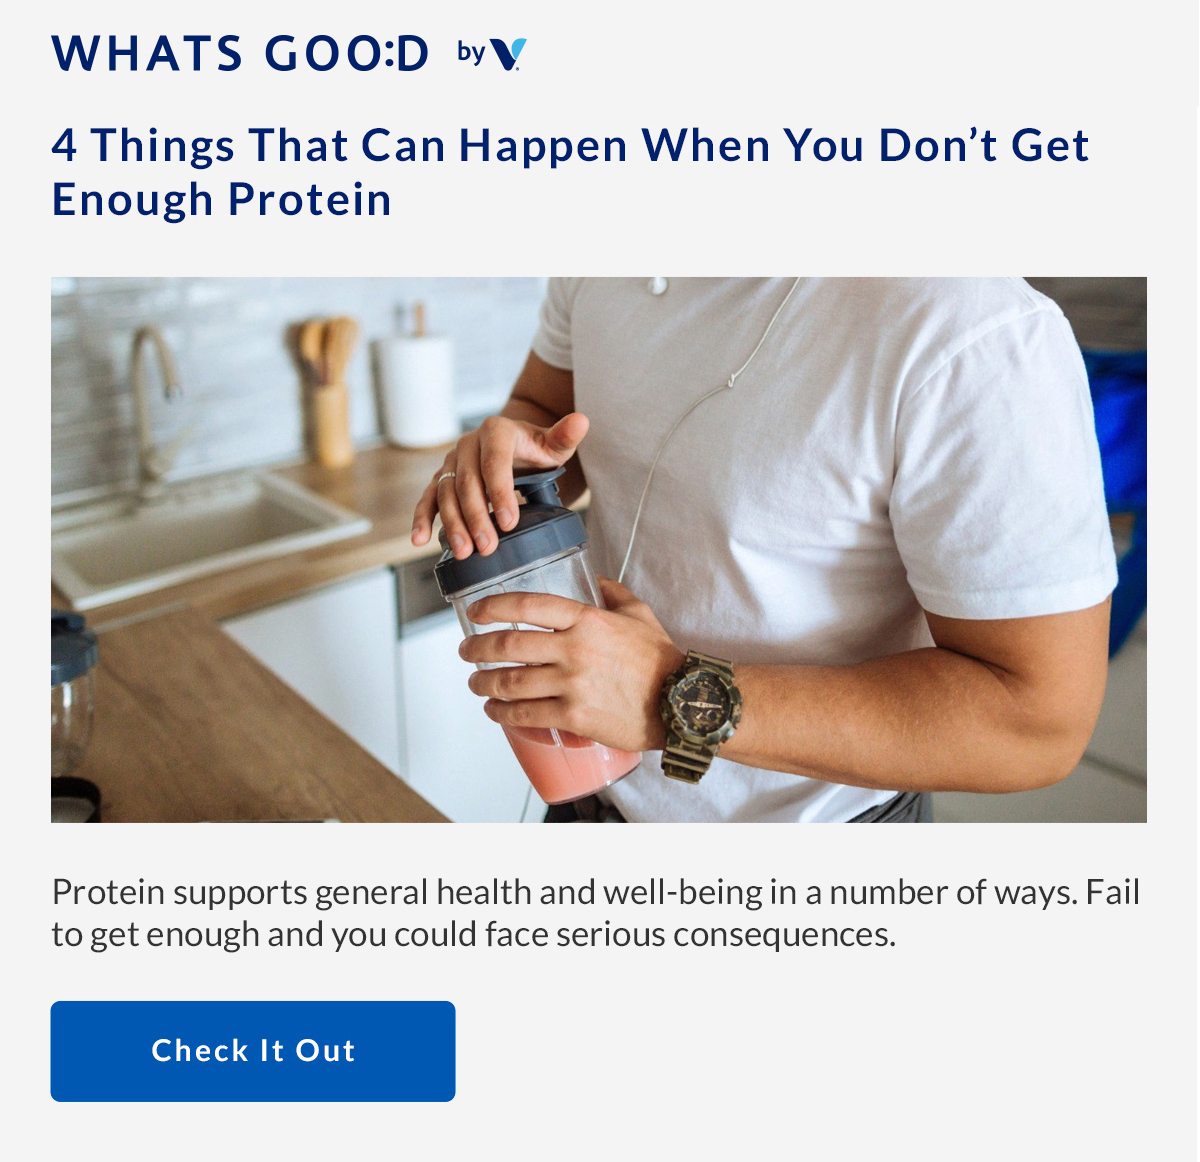 4 Things That Can Happen When You Don't Get Enough Protein